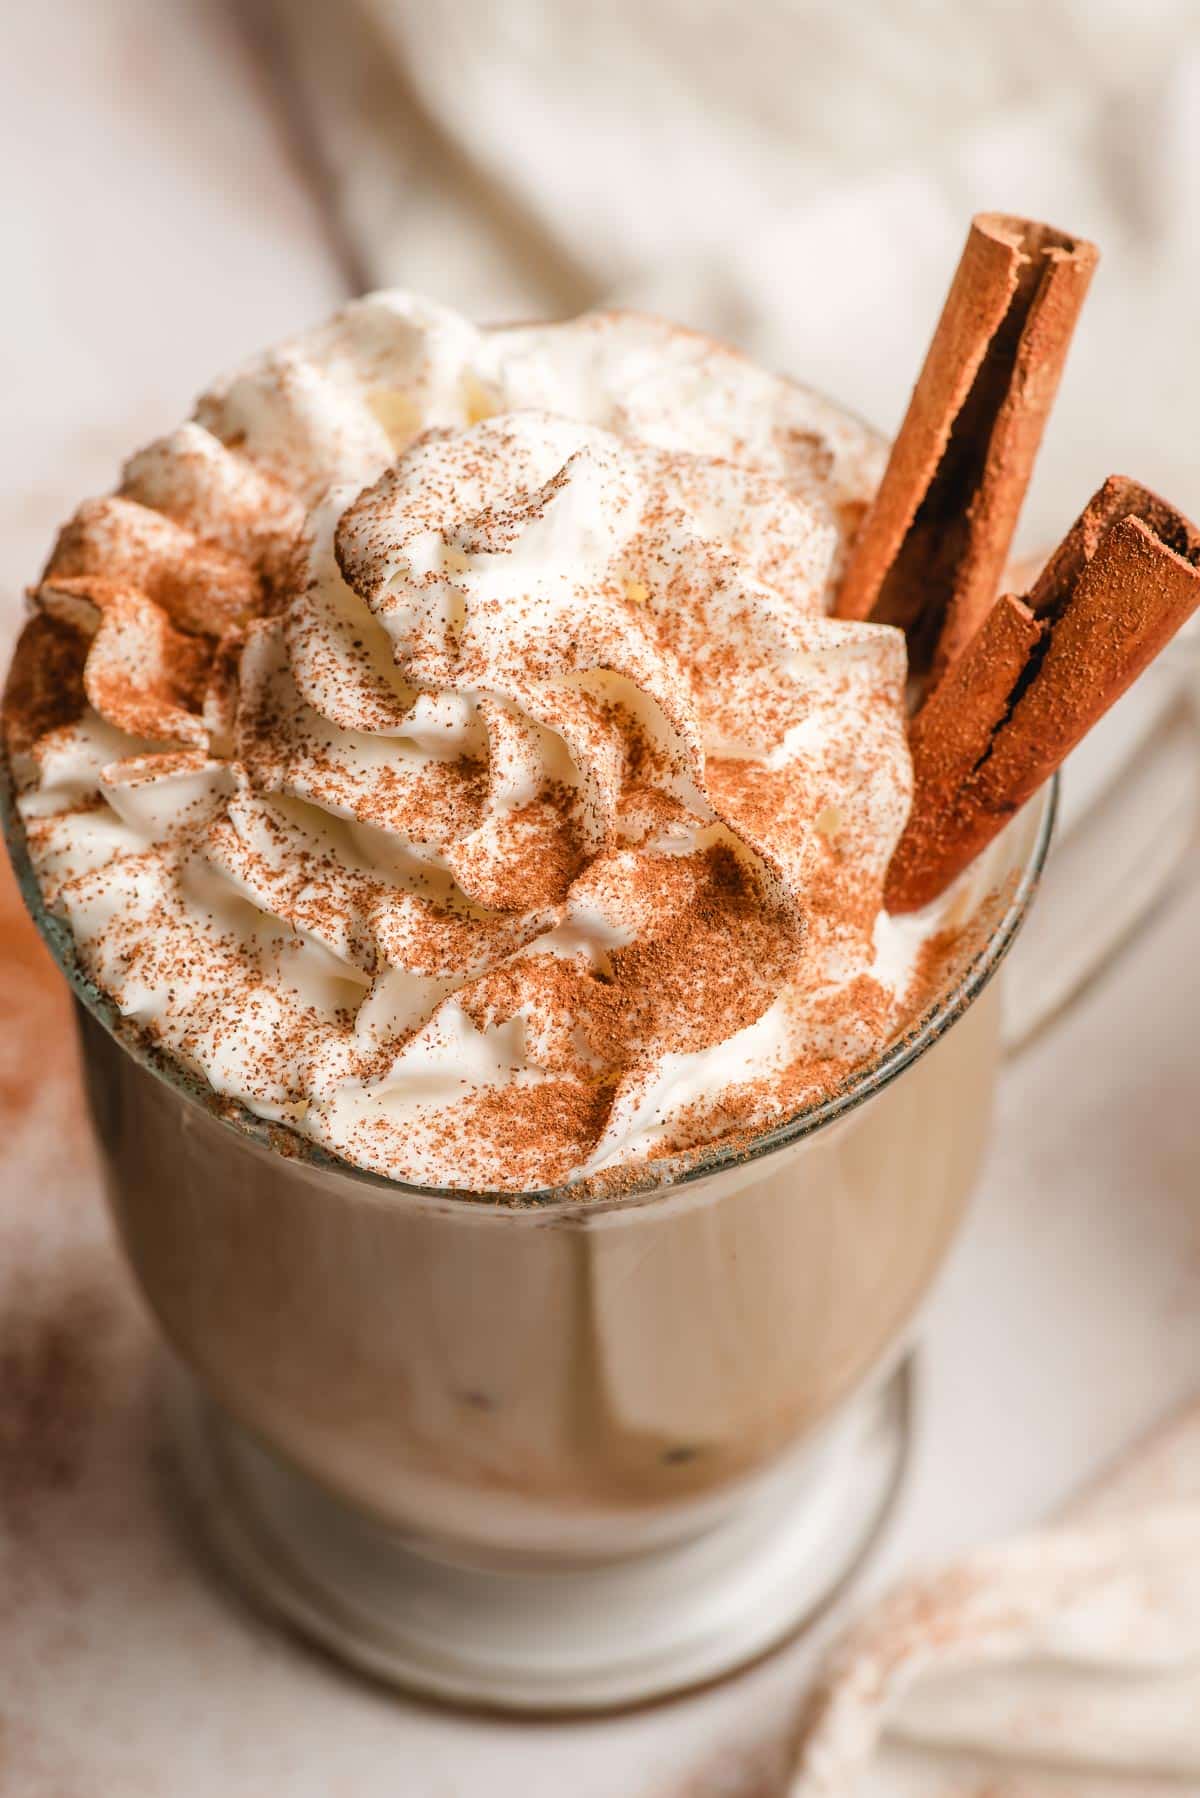 Billowy whipped cream topped with ground cinnamon on top of a cinnamon latte.